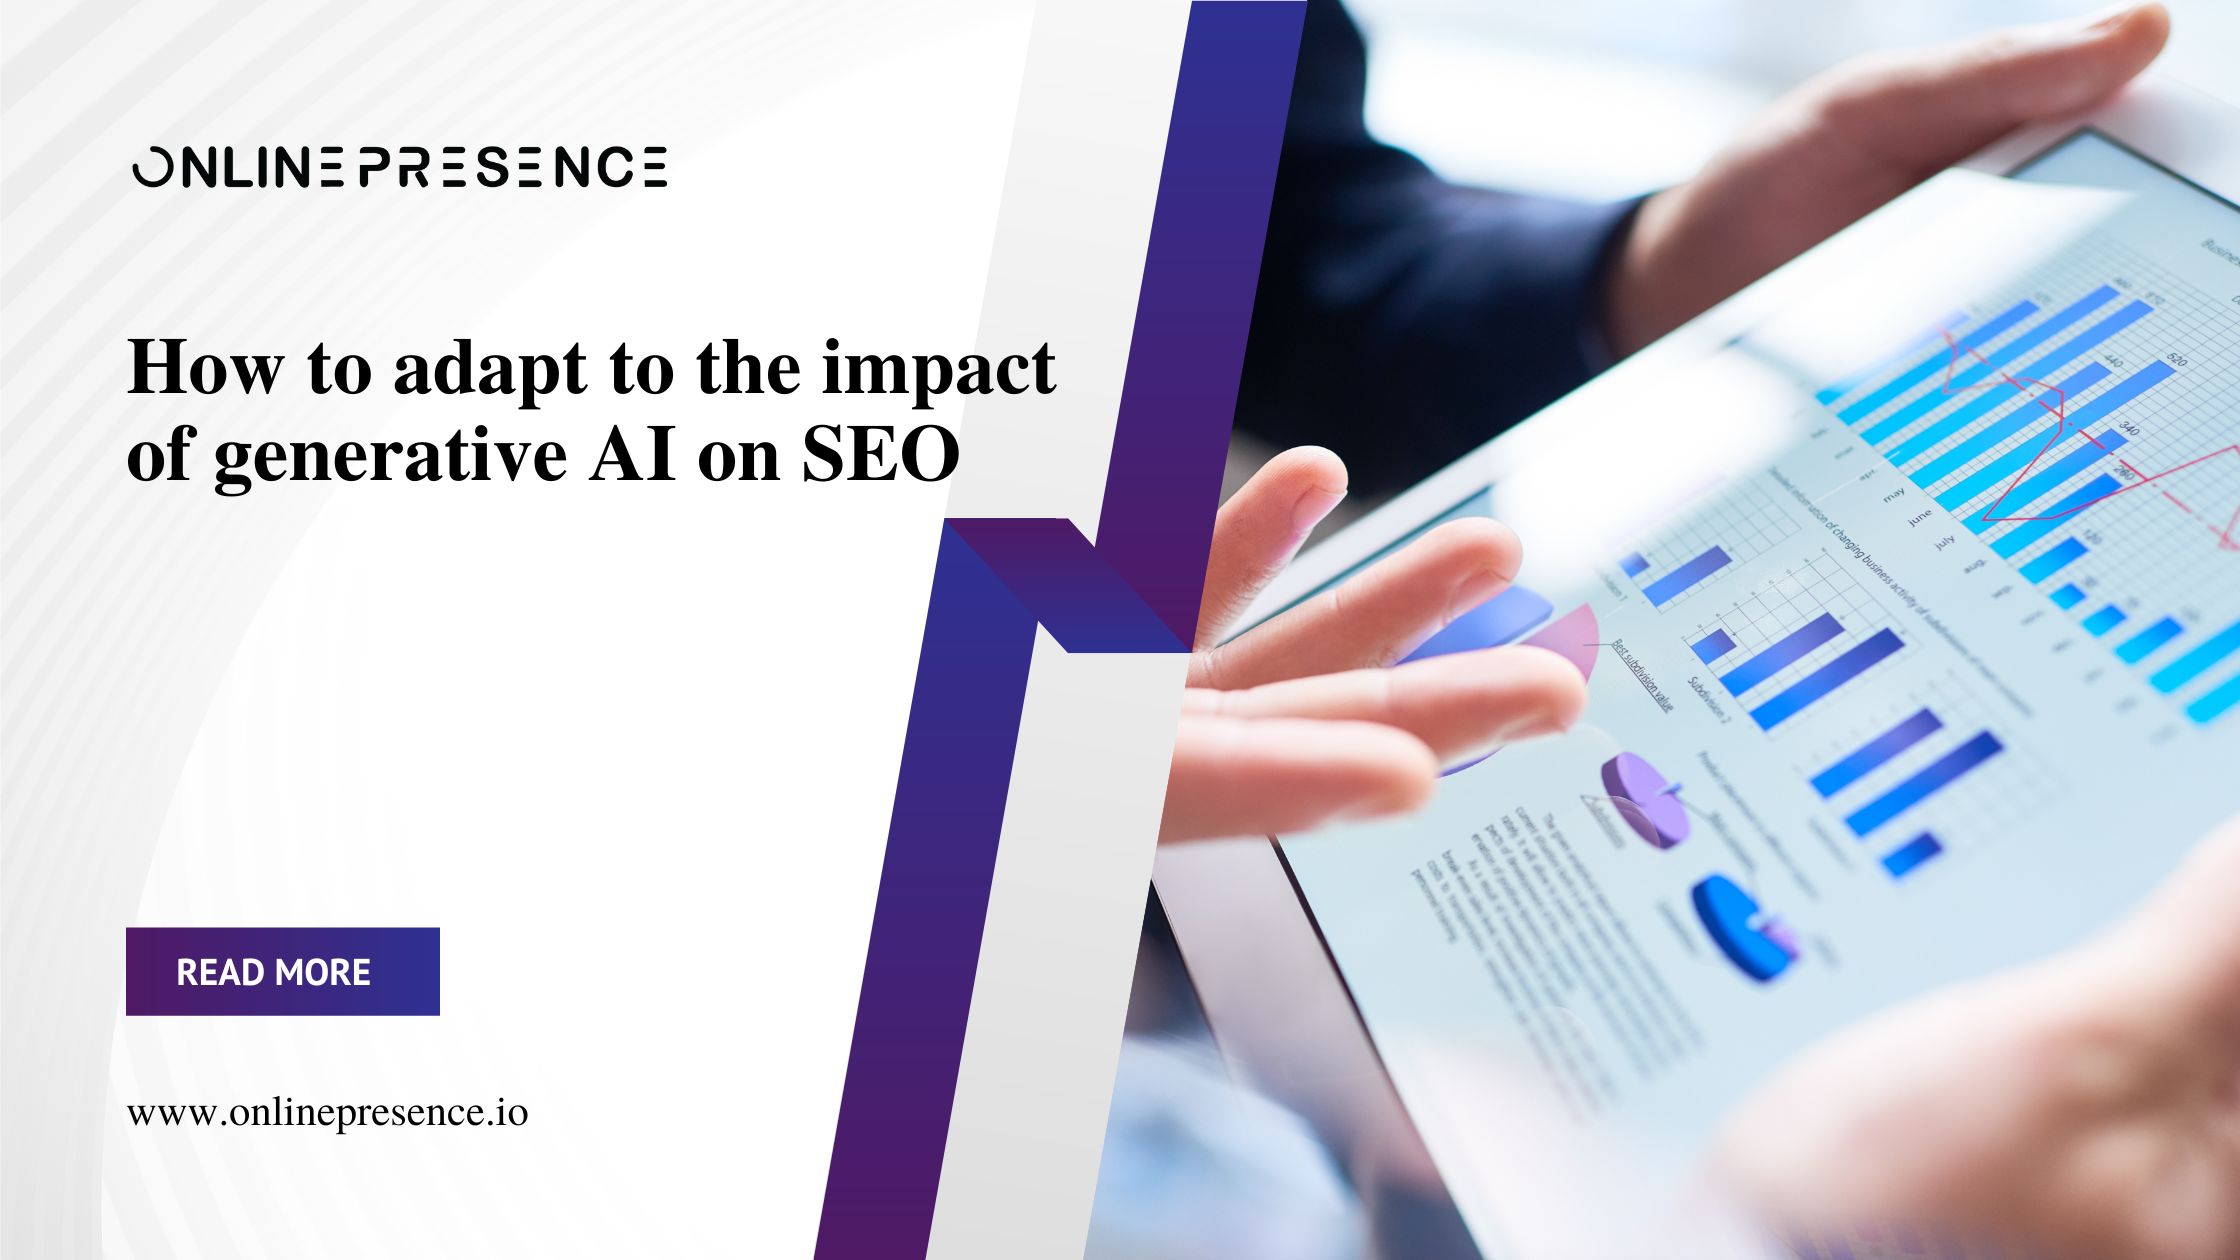 How To Adapt To The Impact Of Generative AI On SEO